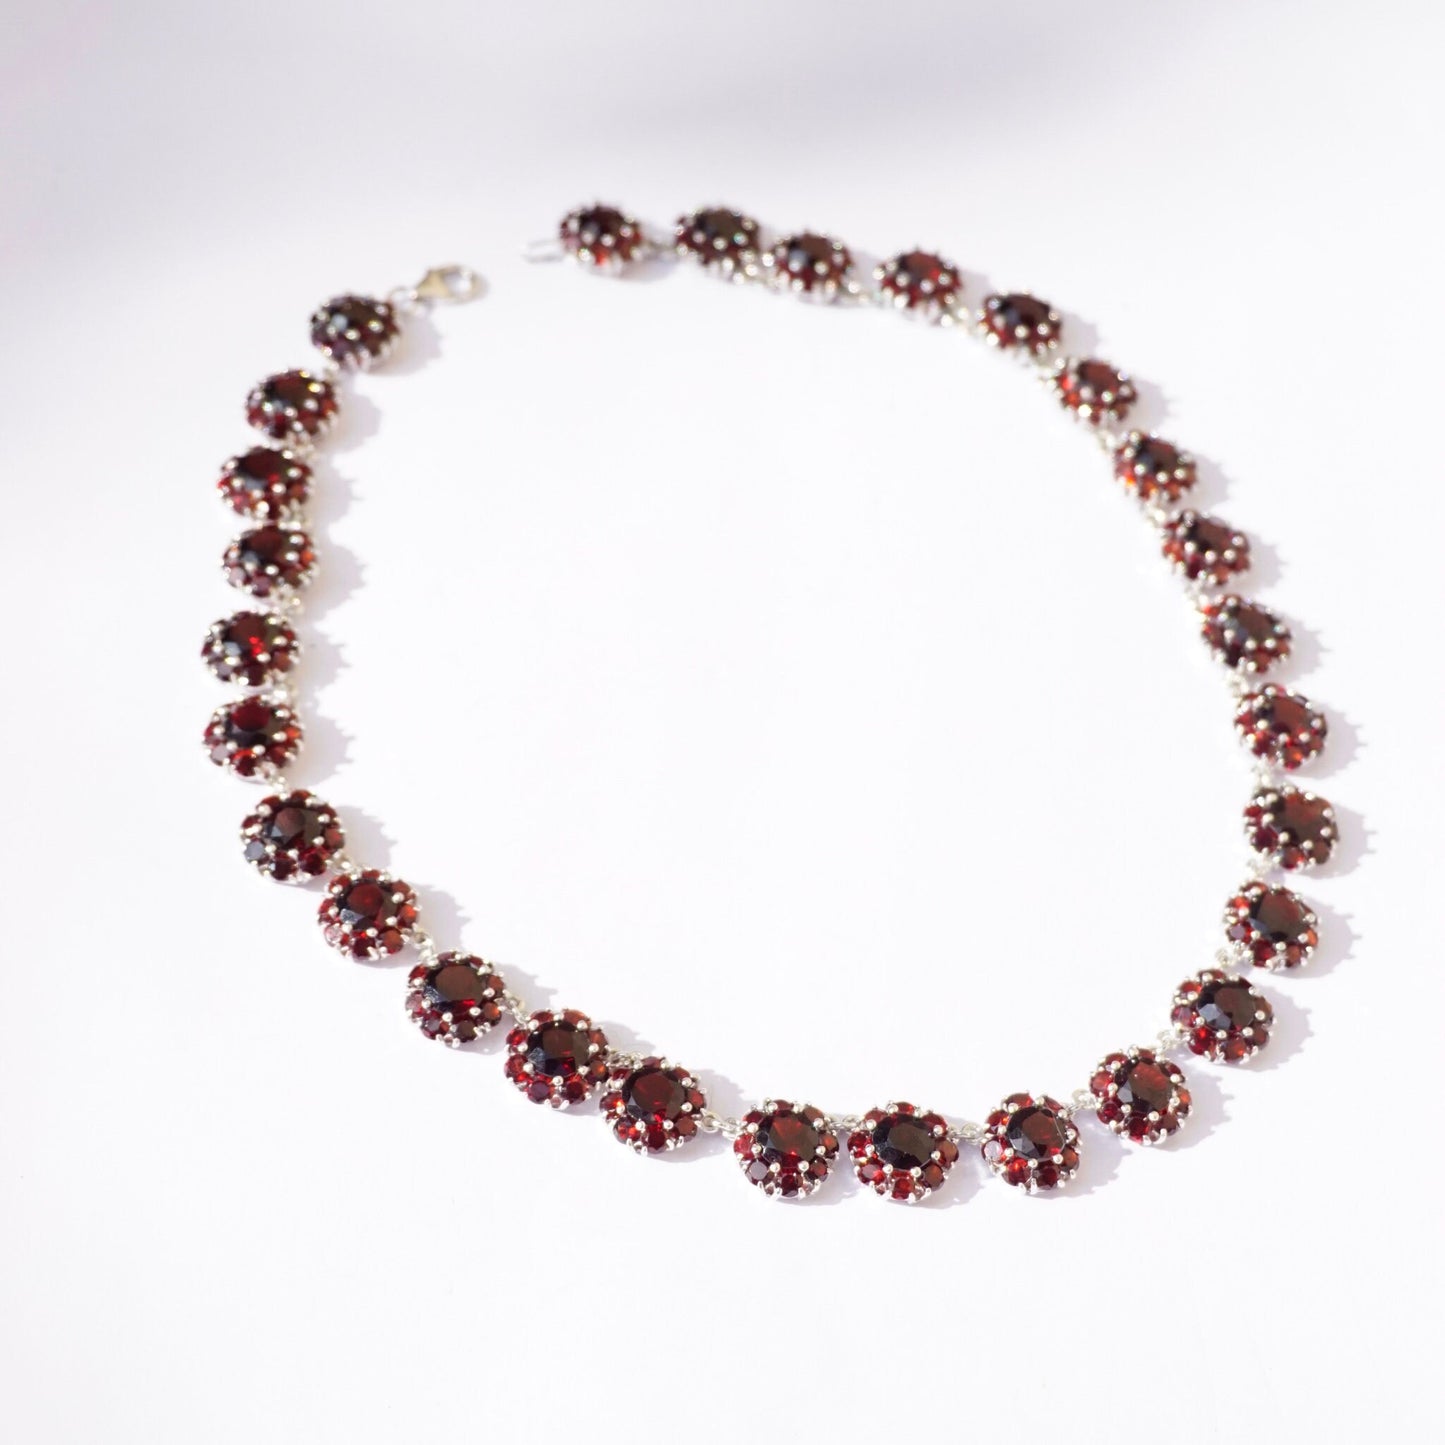 Vintage sterling silver garnet glass stone choker necklace featuring beautiful red stones in a beaded collar design.